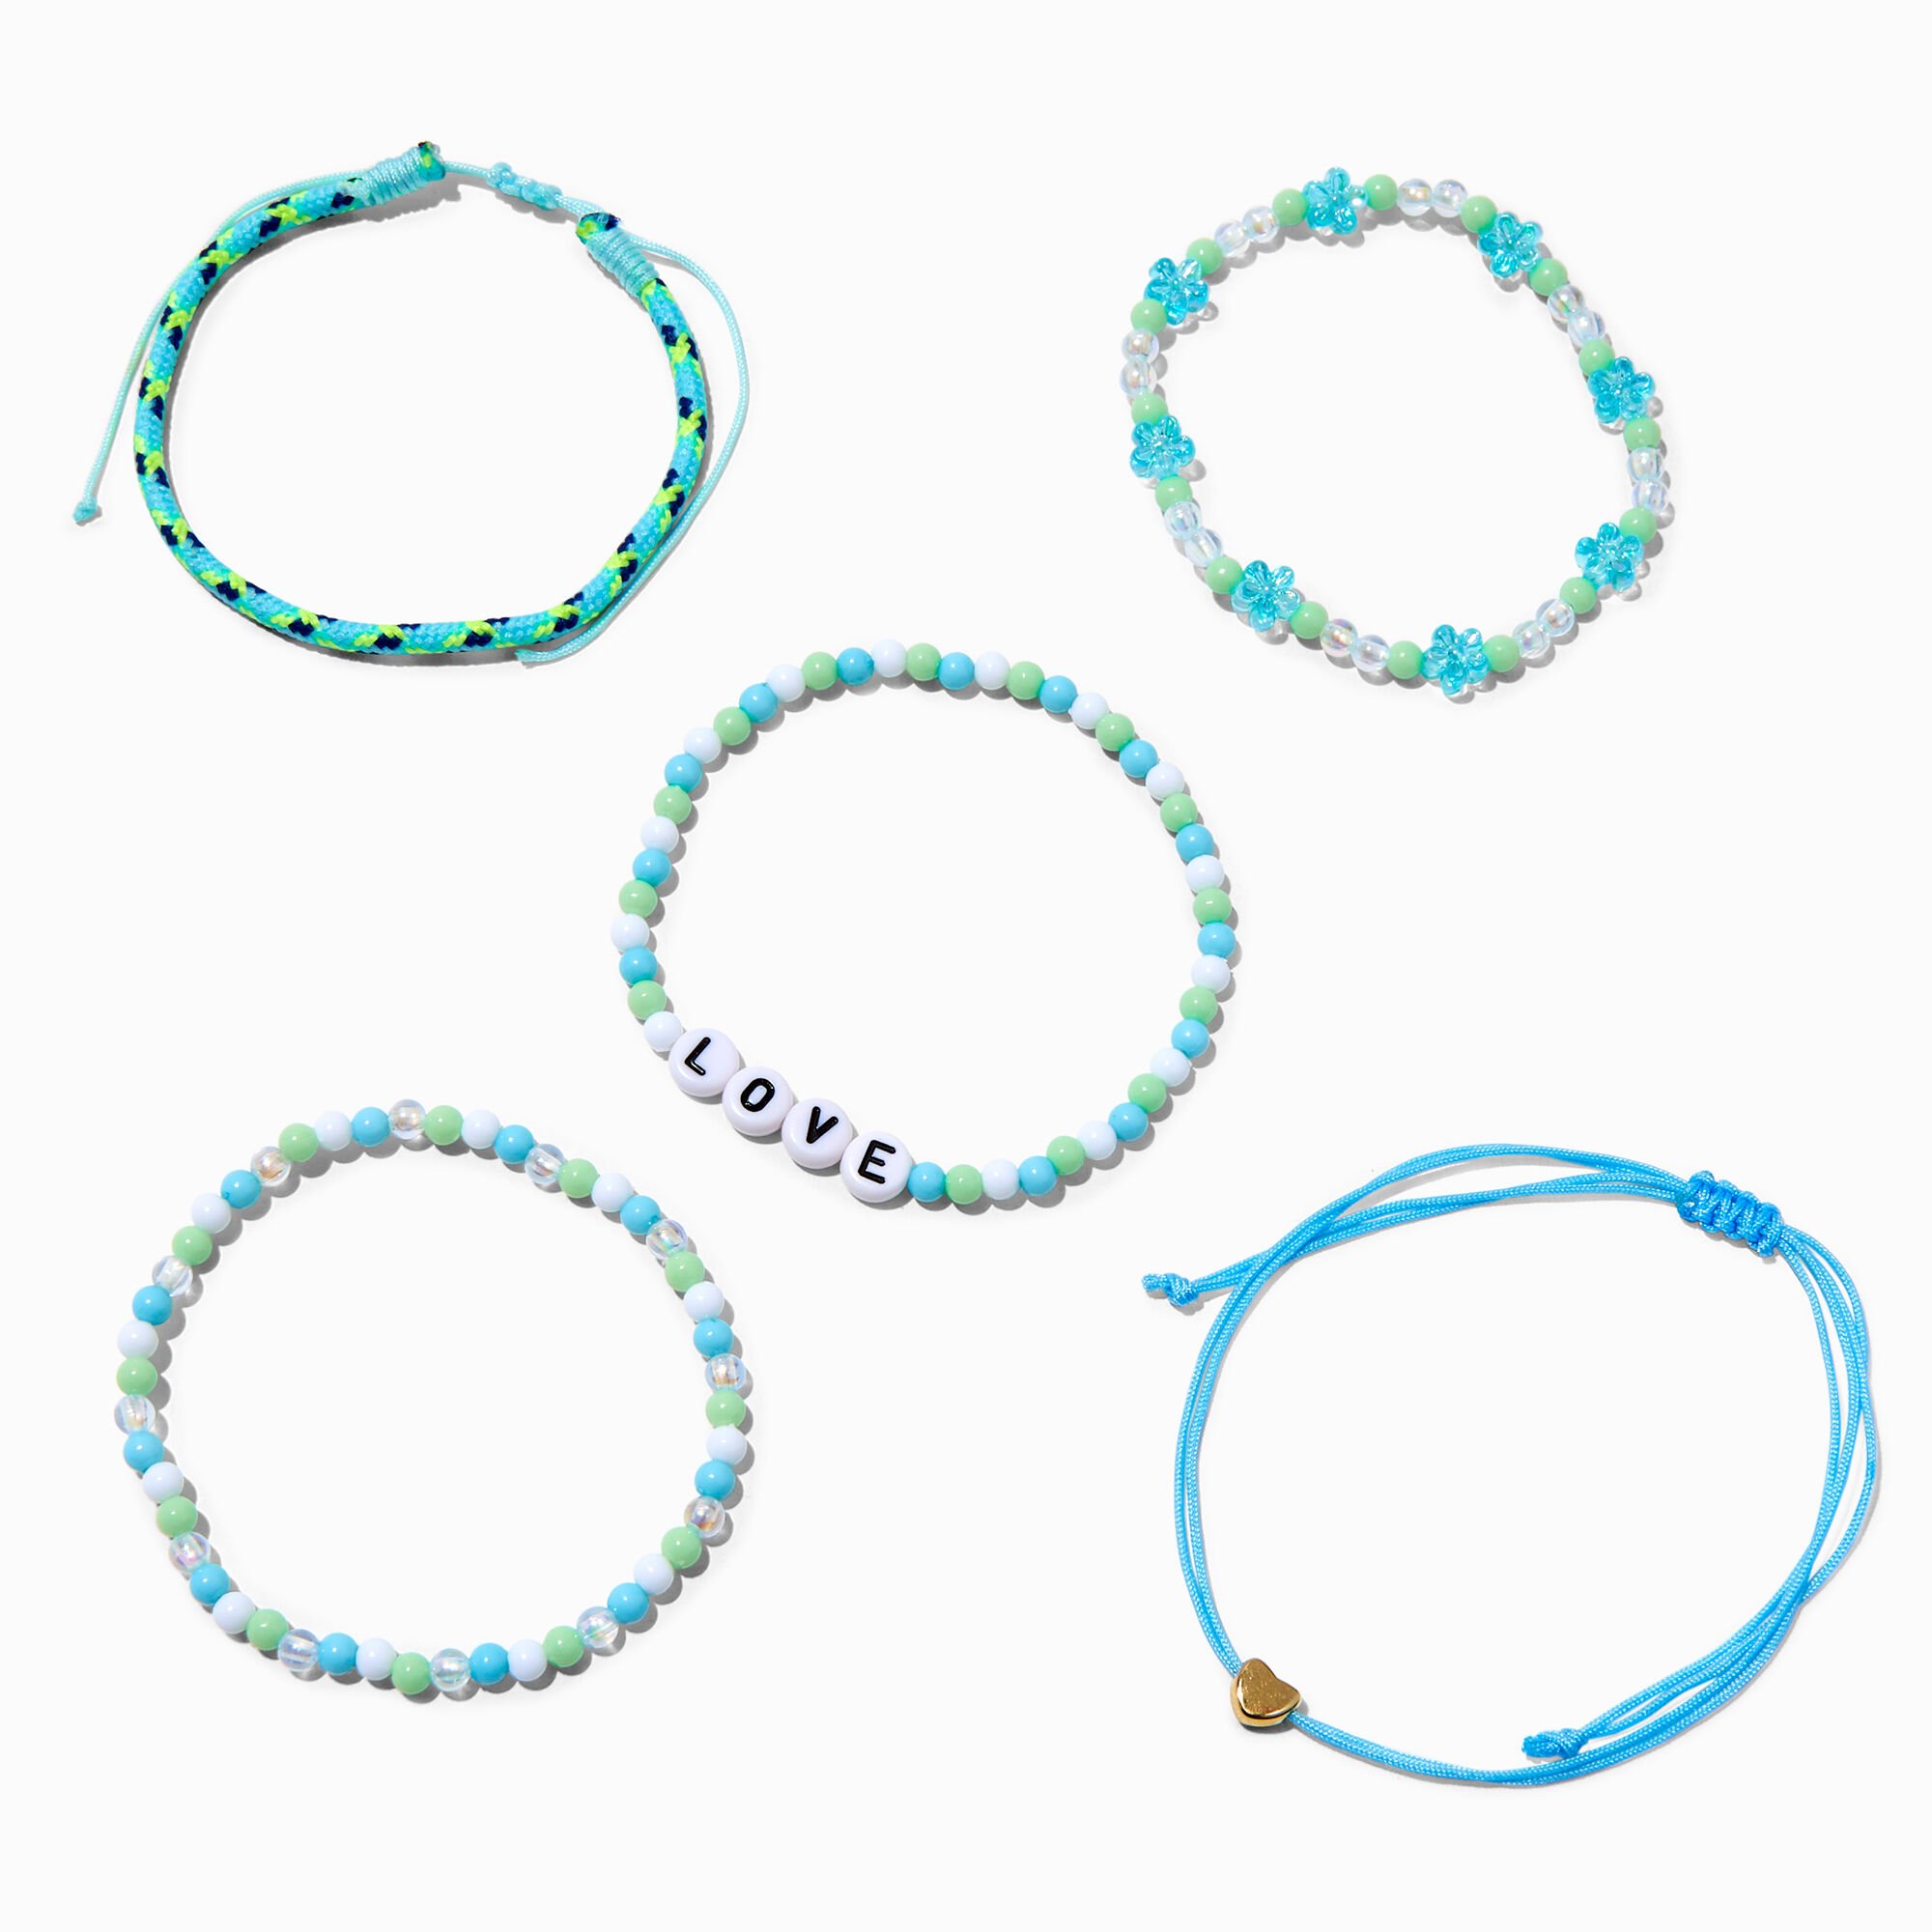 View Claires Love Beaded Stretch Bracelet Set 5 Pack Turquoise information